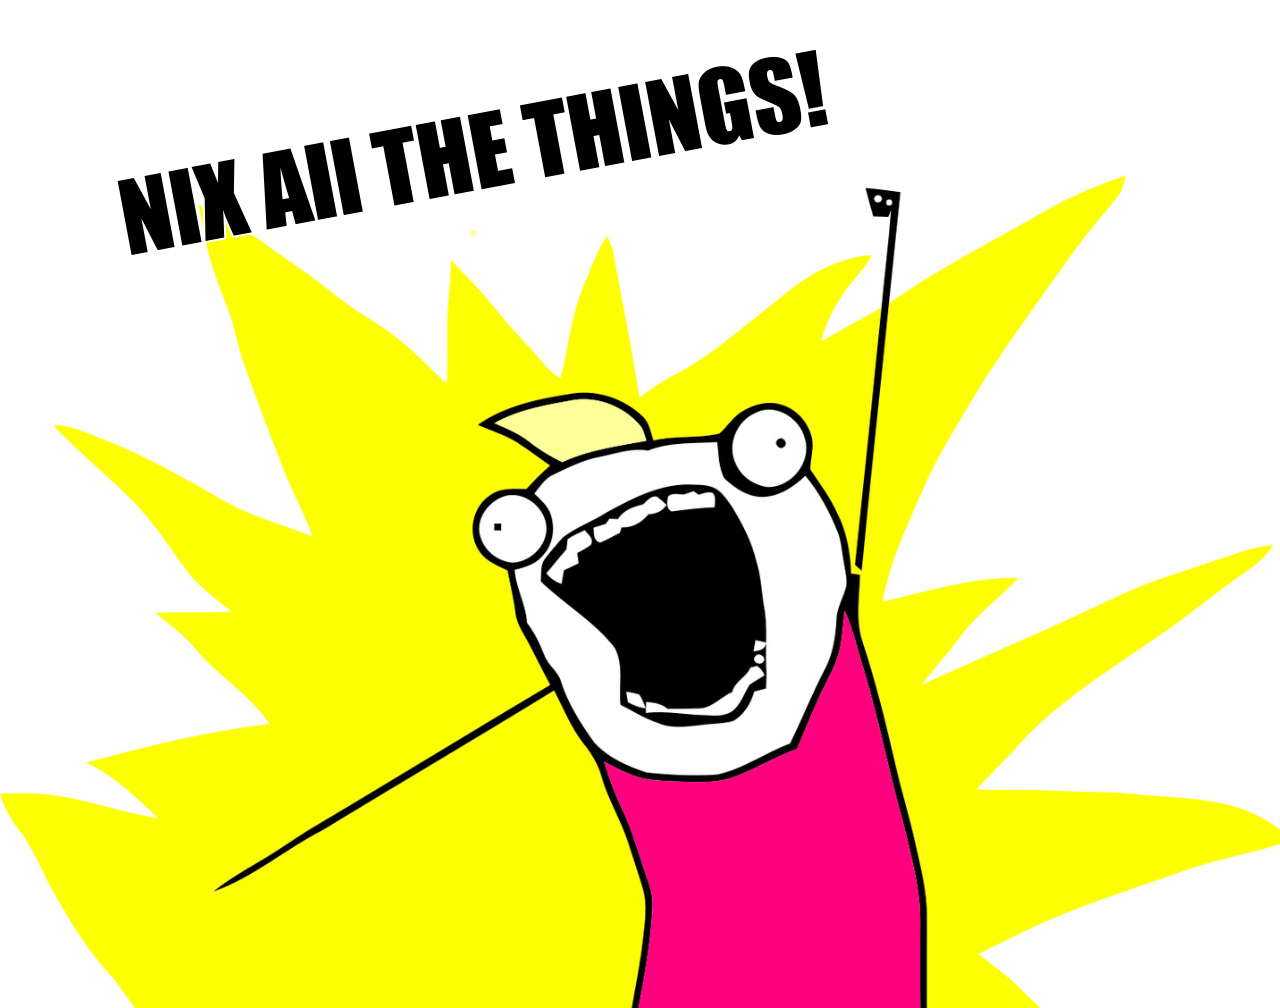 Nix all the things!